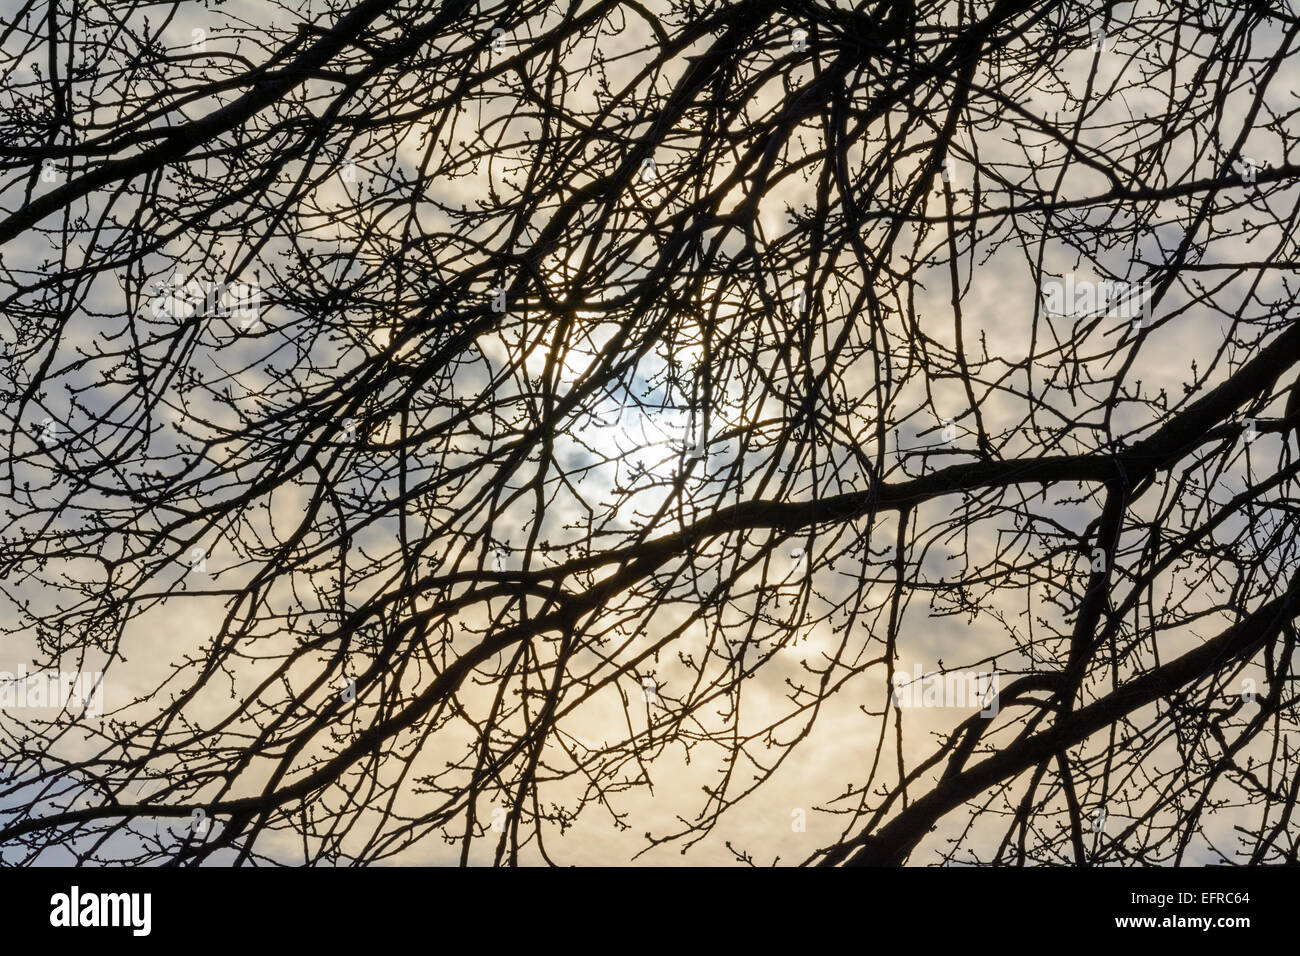 Silhouette of a leafless tree in Winter in front of the sun shining through a cloudy sky, Stock Photo